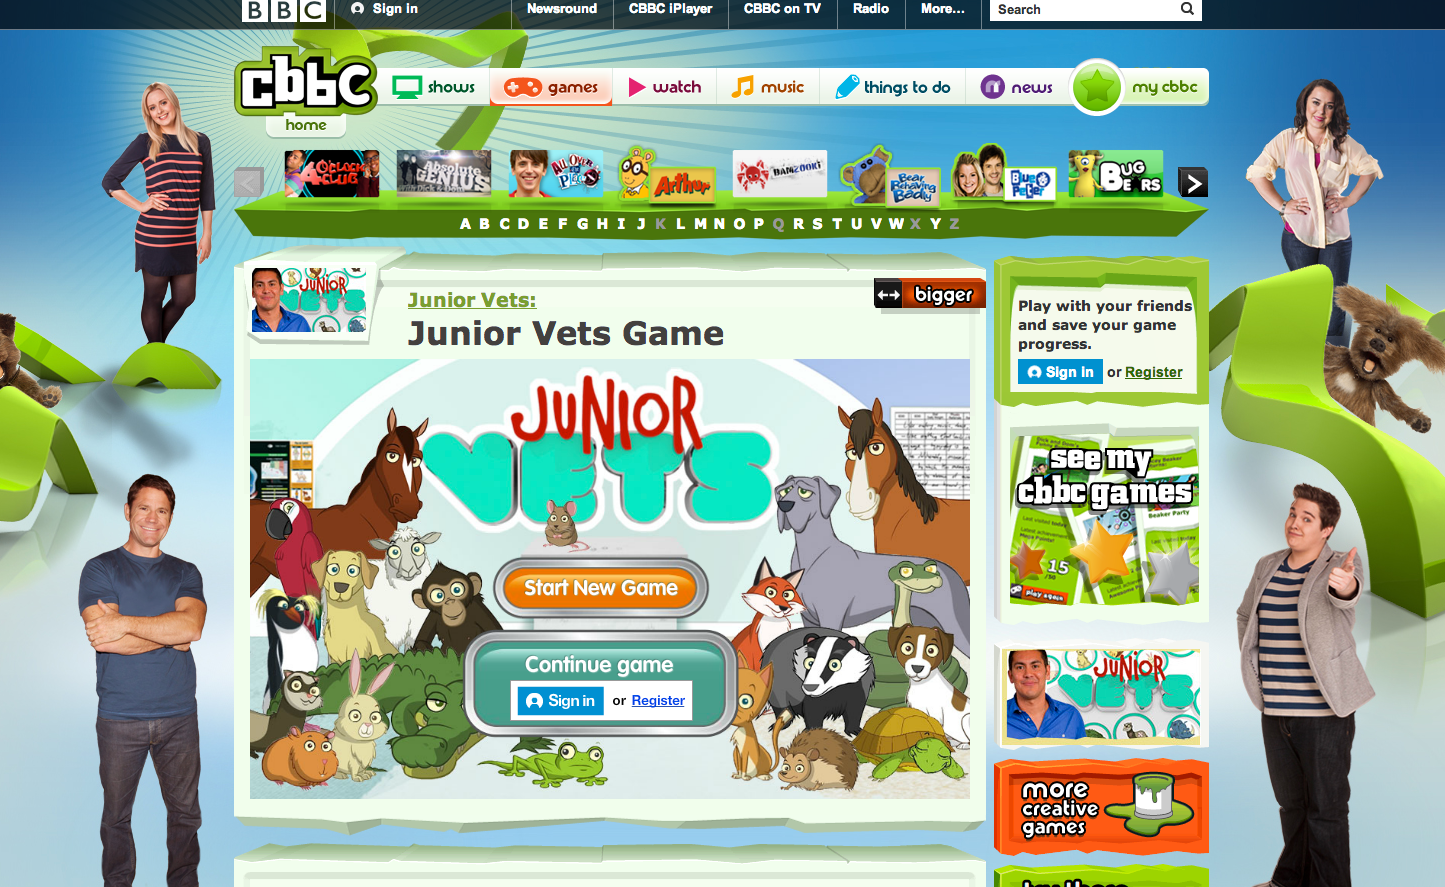 Image of the Junior Vets game on the CBBC games website